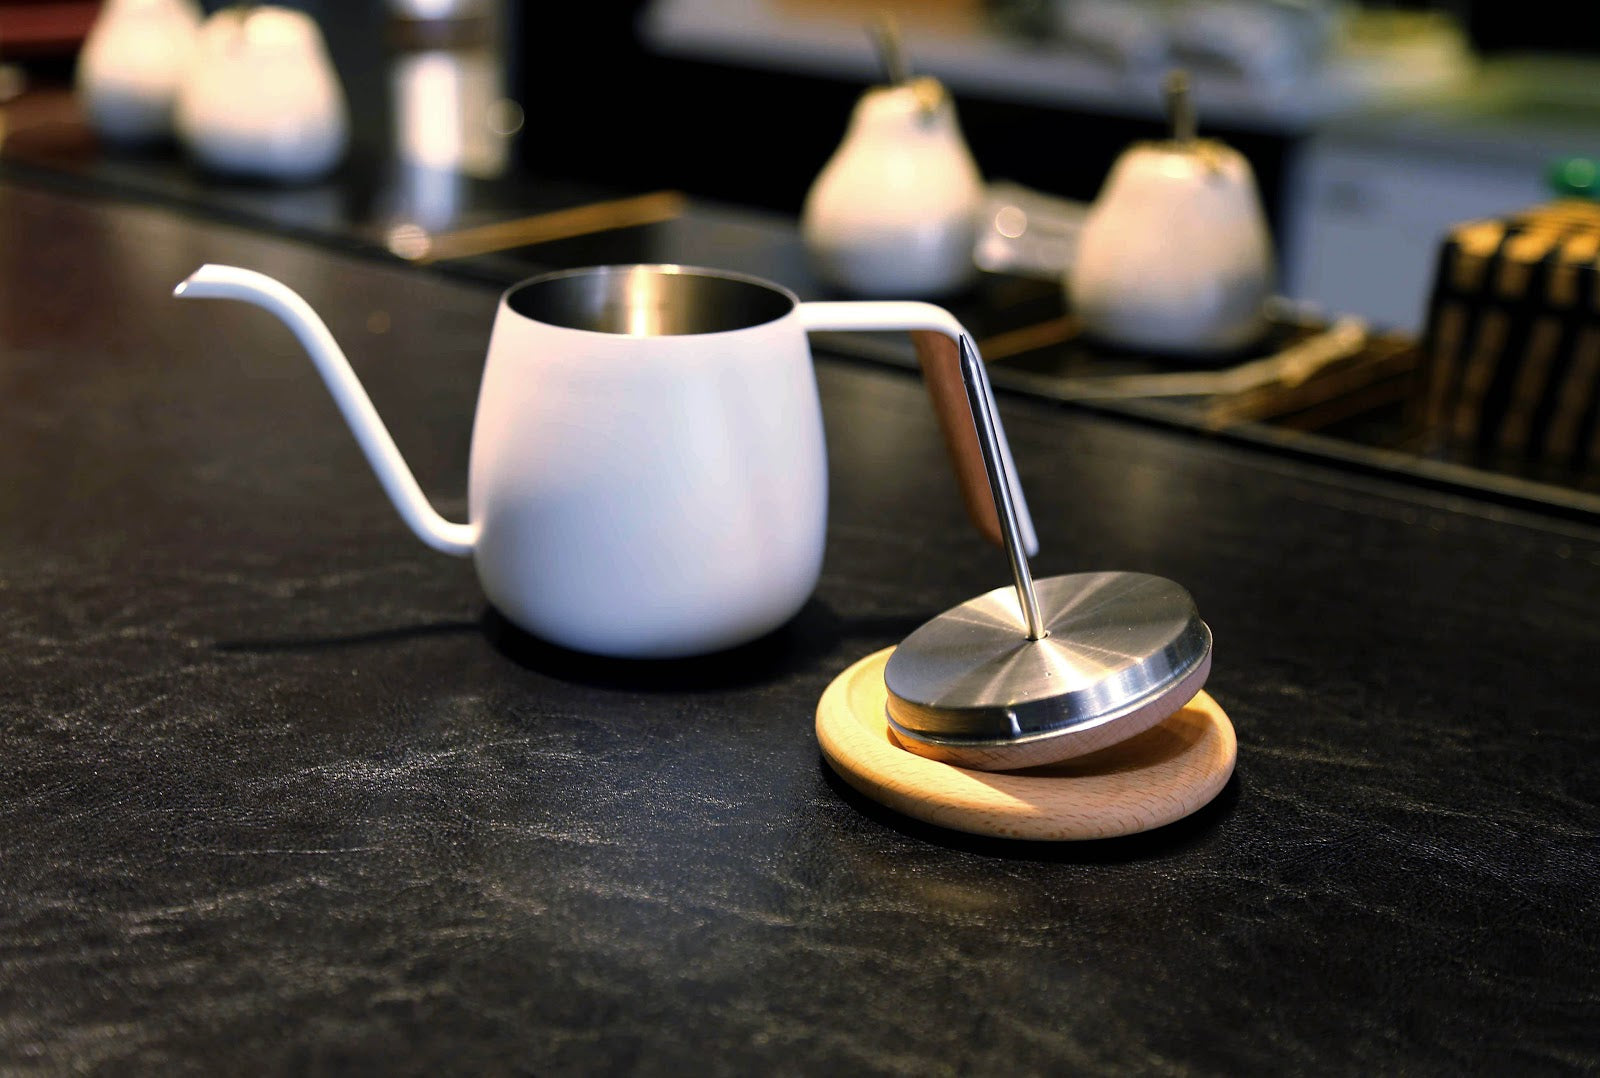 TAMAGO mini pour-over coffee kettle – Simple Real